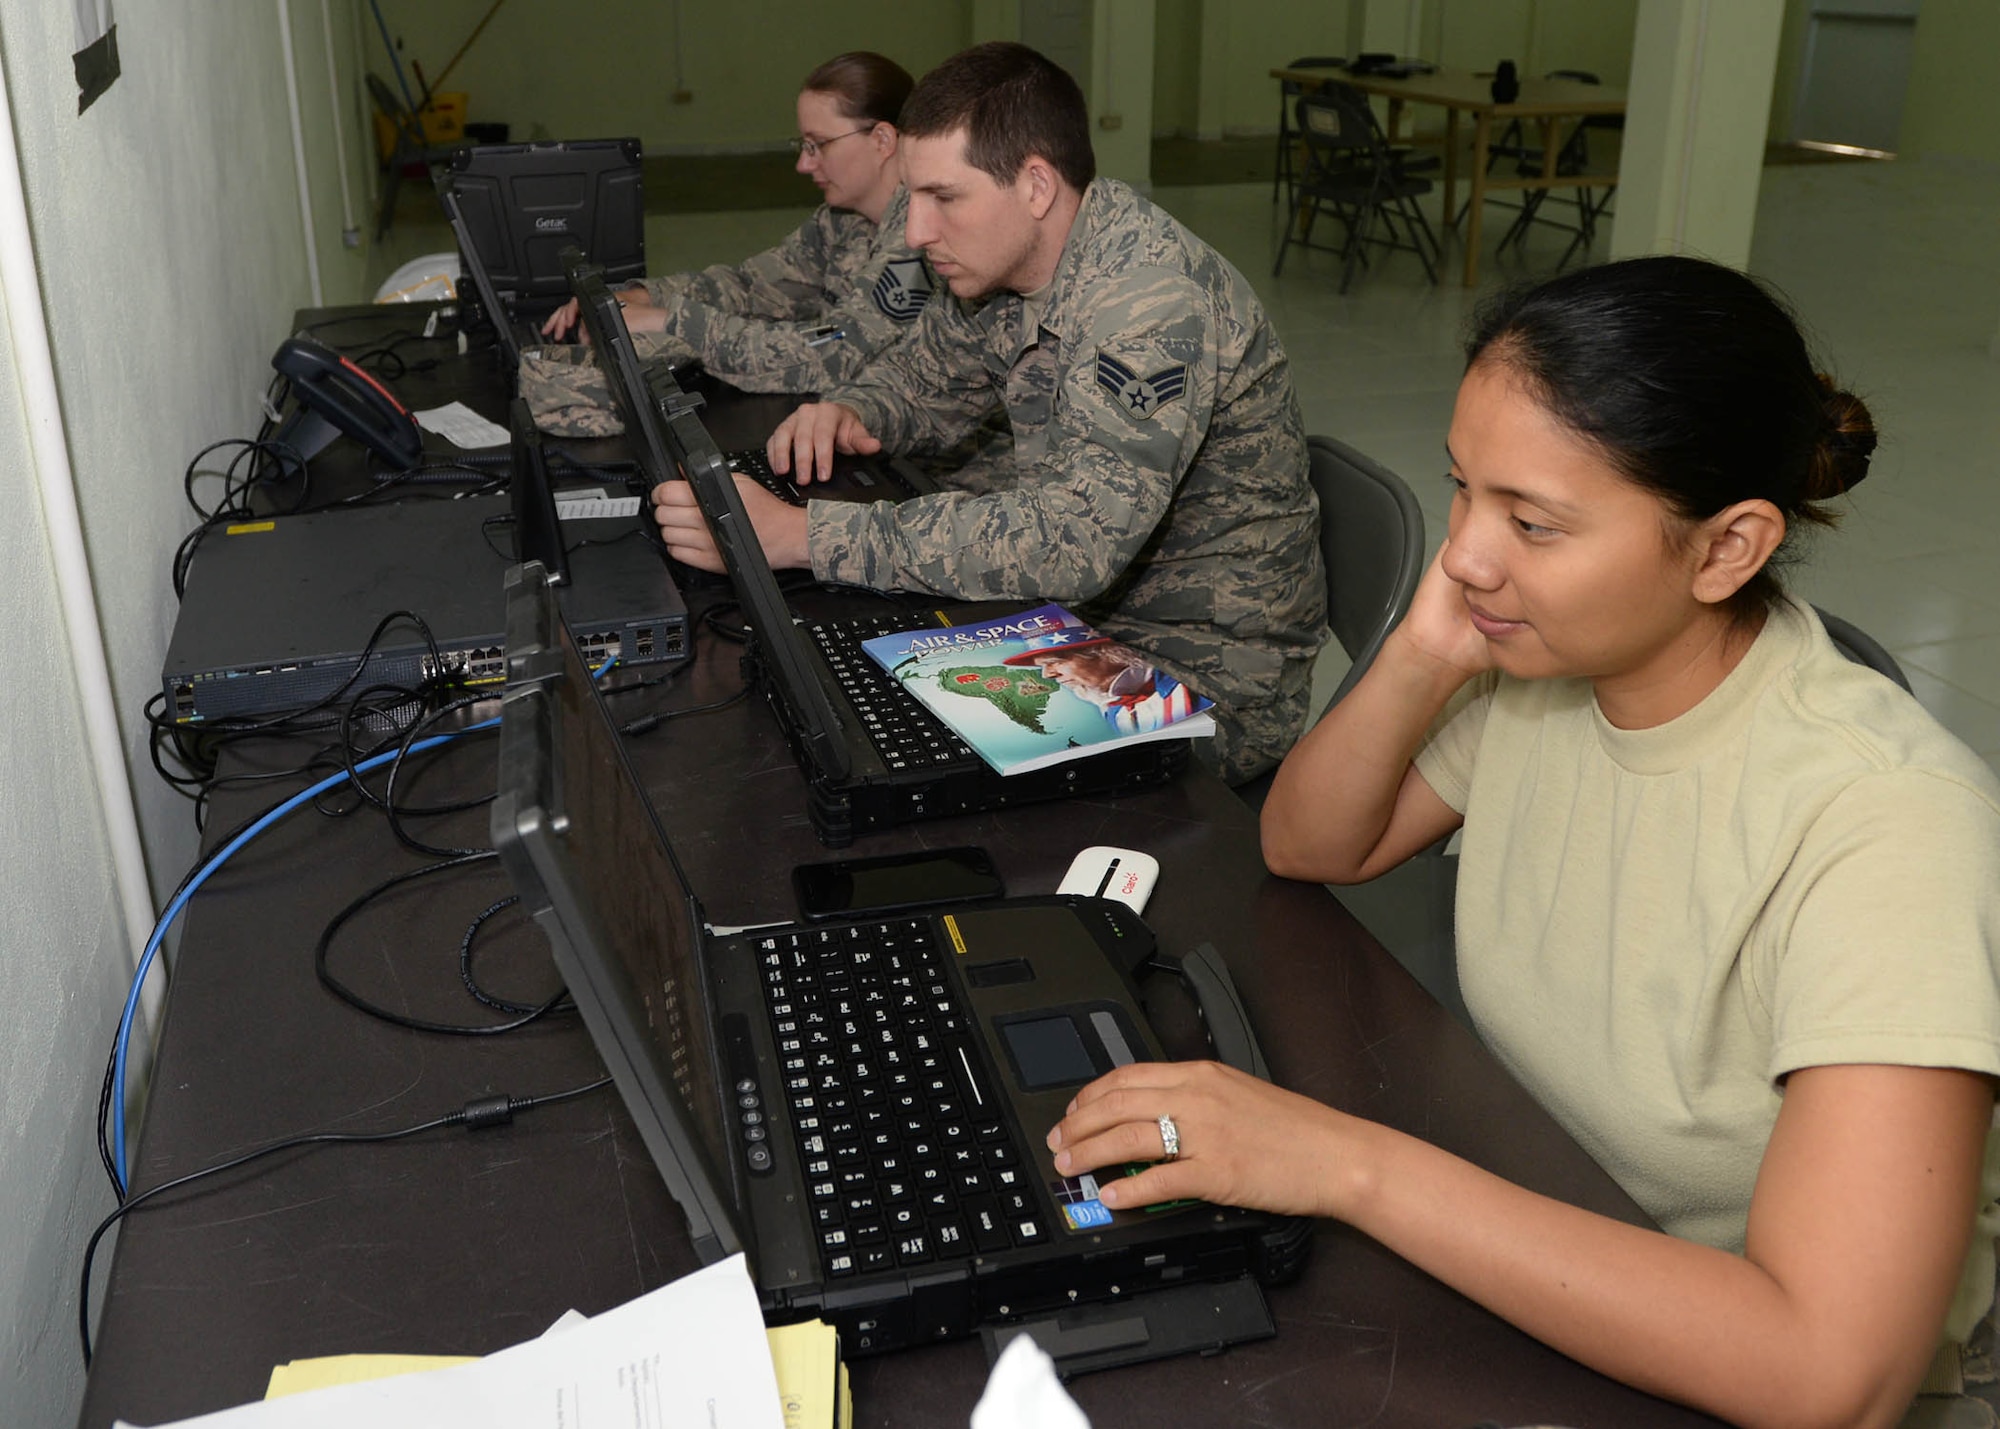 U.S. Airmen participating in NEW HORIZONS 2017 use government laptops as Senior Airman Joshua Marsh, a cyber systems operator with the 51st Combat Communications Squadron (CCS) out of Robins Air Force Base, Ga., center, fixes a software problem in Arroyo Cano, Dominican Republic, April 13, 2017. U.S. Service members supporting NEW HORIZONS 2017 are provided with access to government computer, phone lines and wireless routers by the 51st CCS to complete their missions. (U.S. Air Force photo by Staff Sgt. Timothy M. Young)